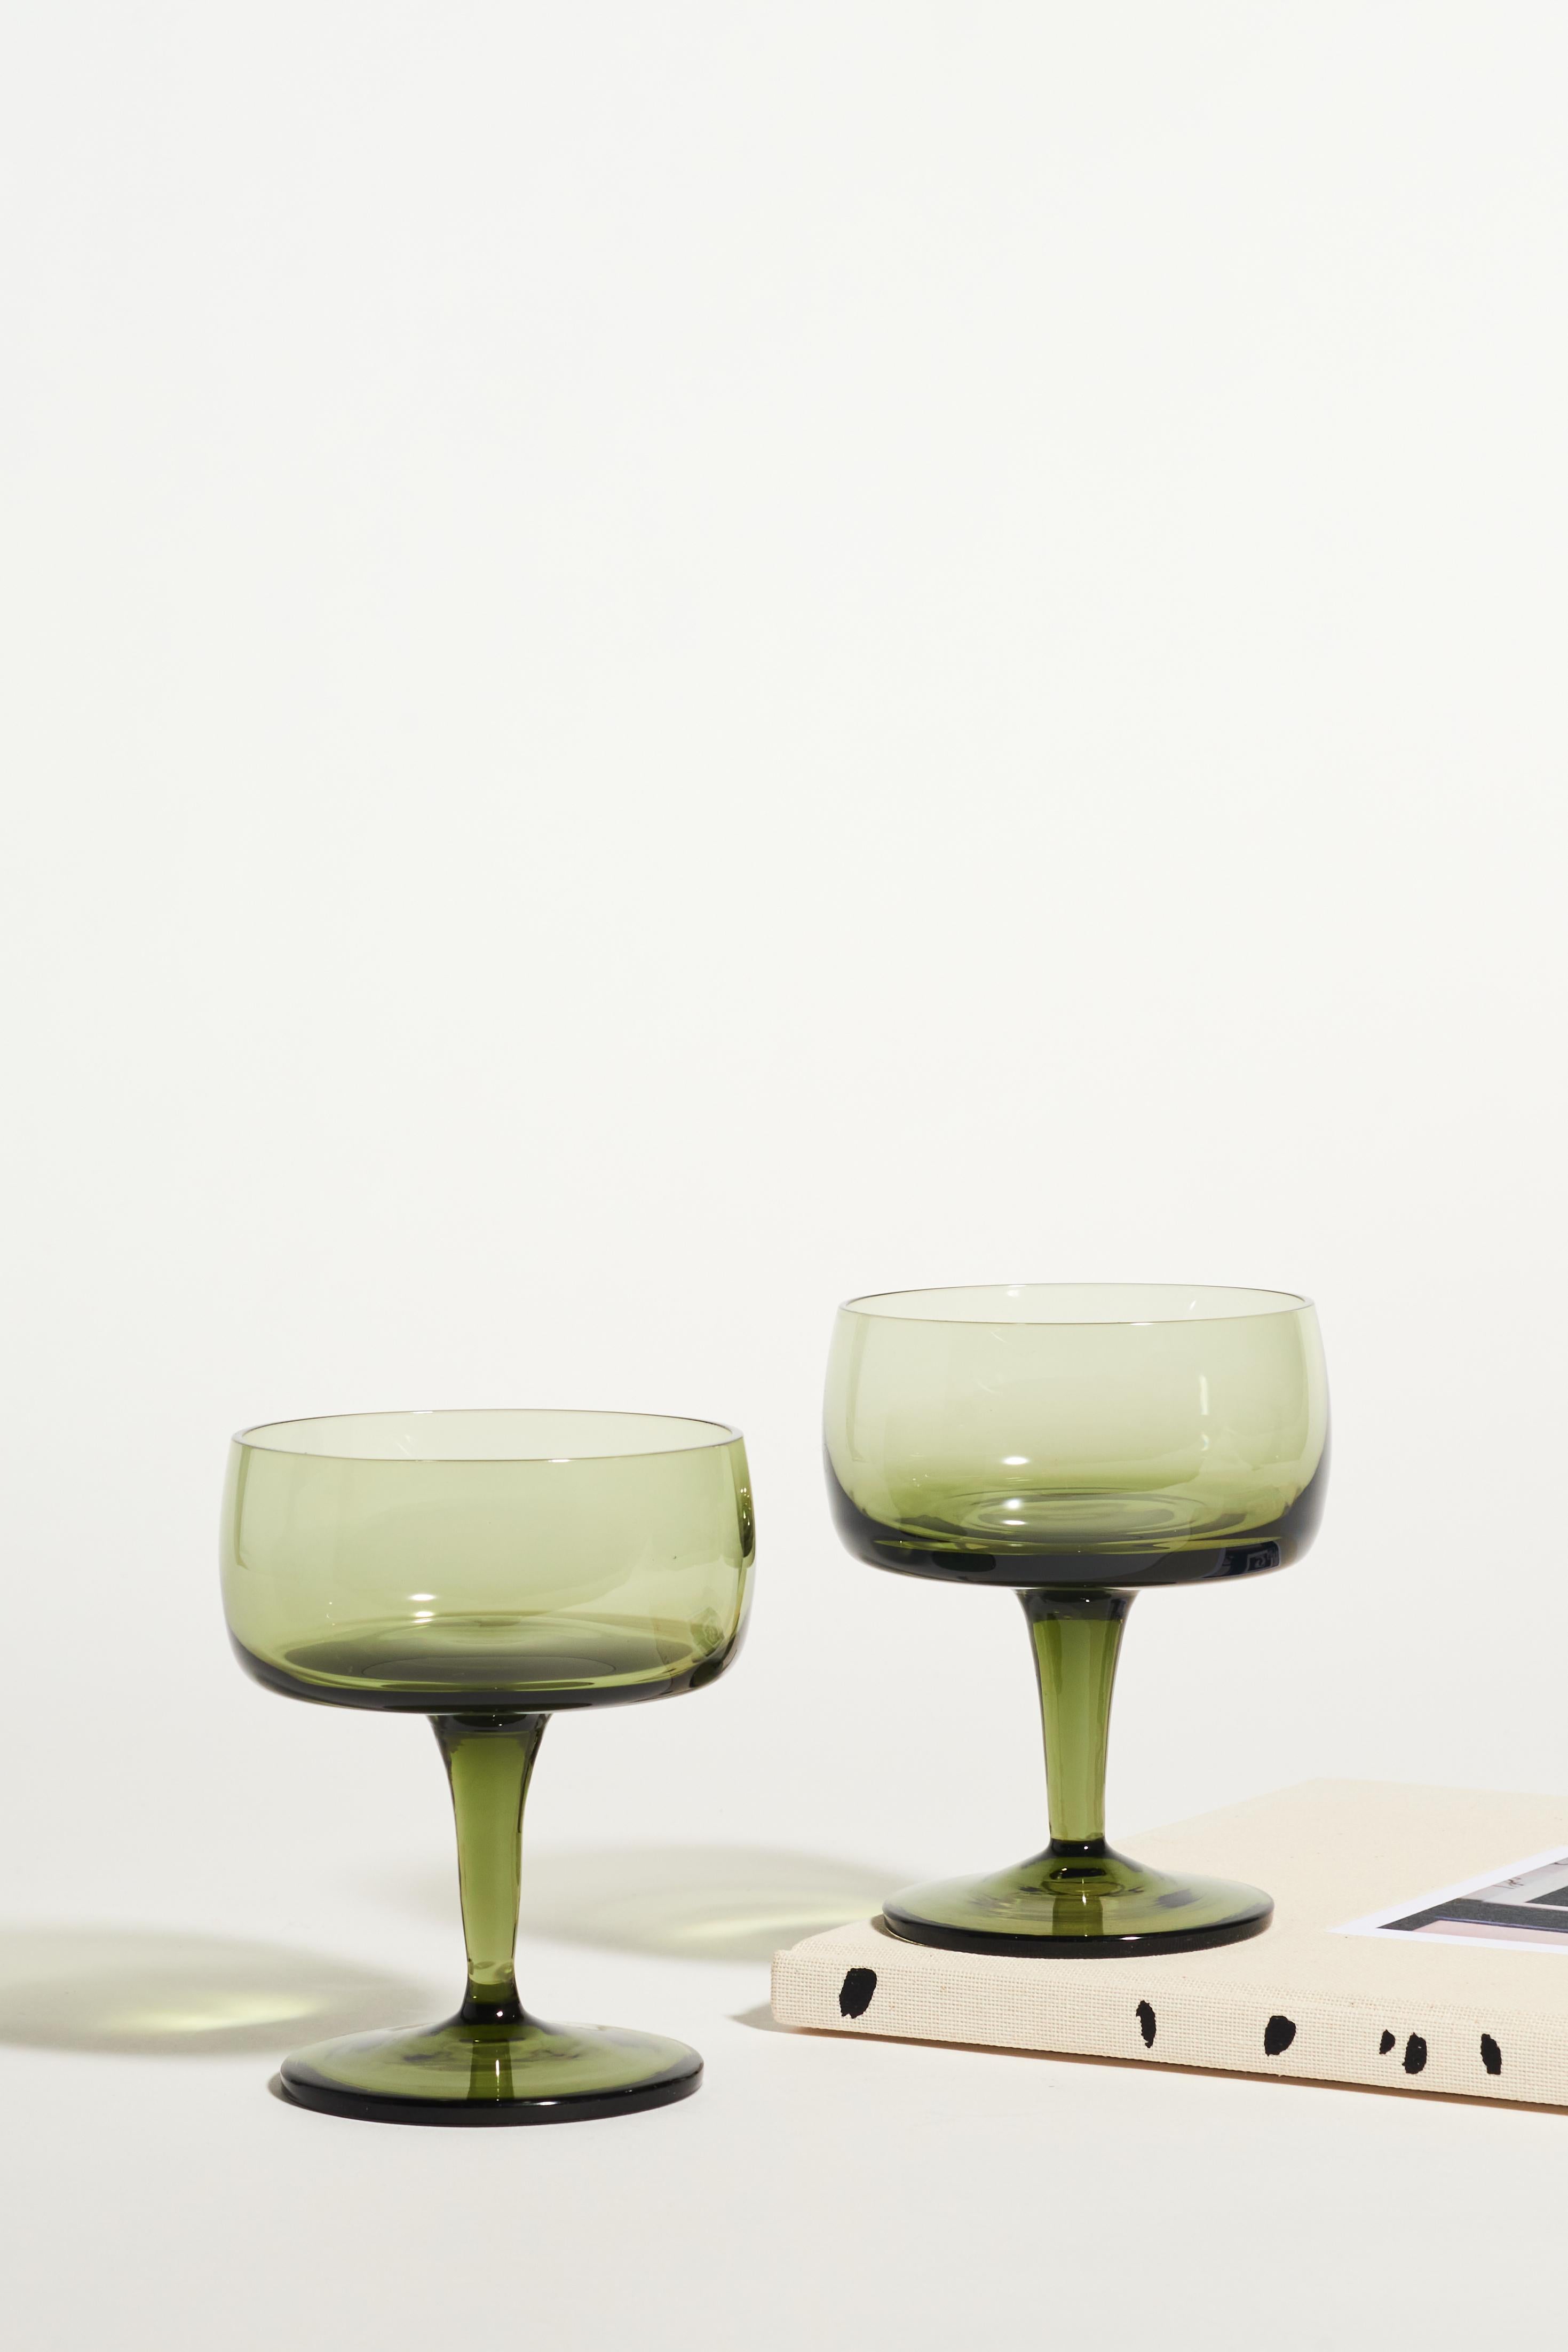 Mid-20th Century Olive Green Cocktail Glasses Set of Two